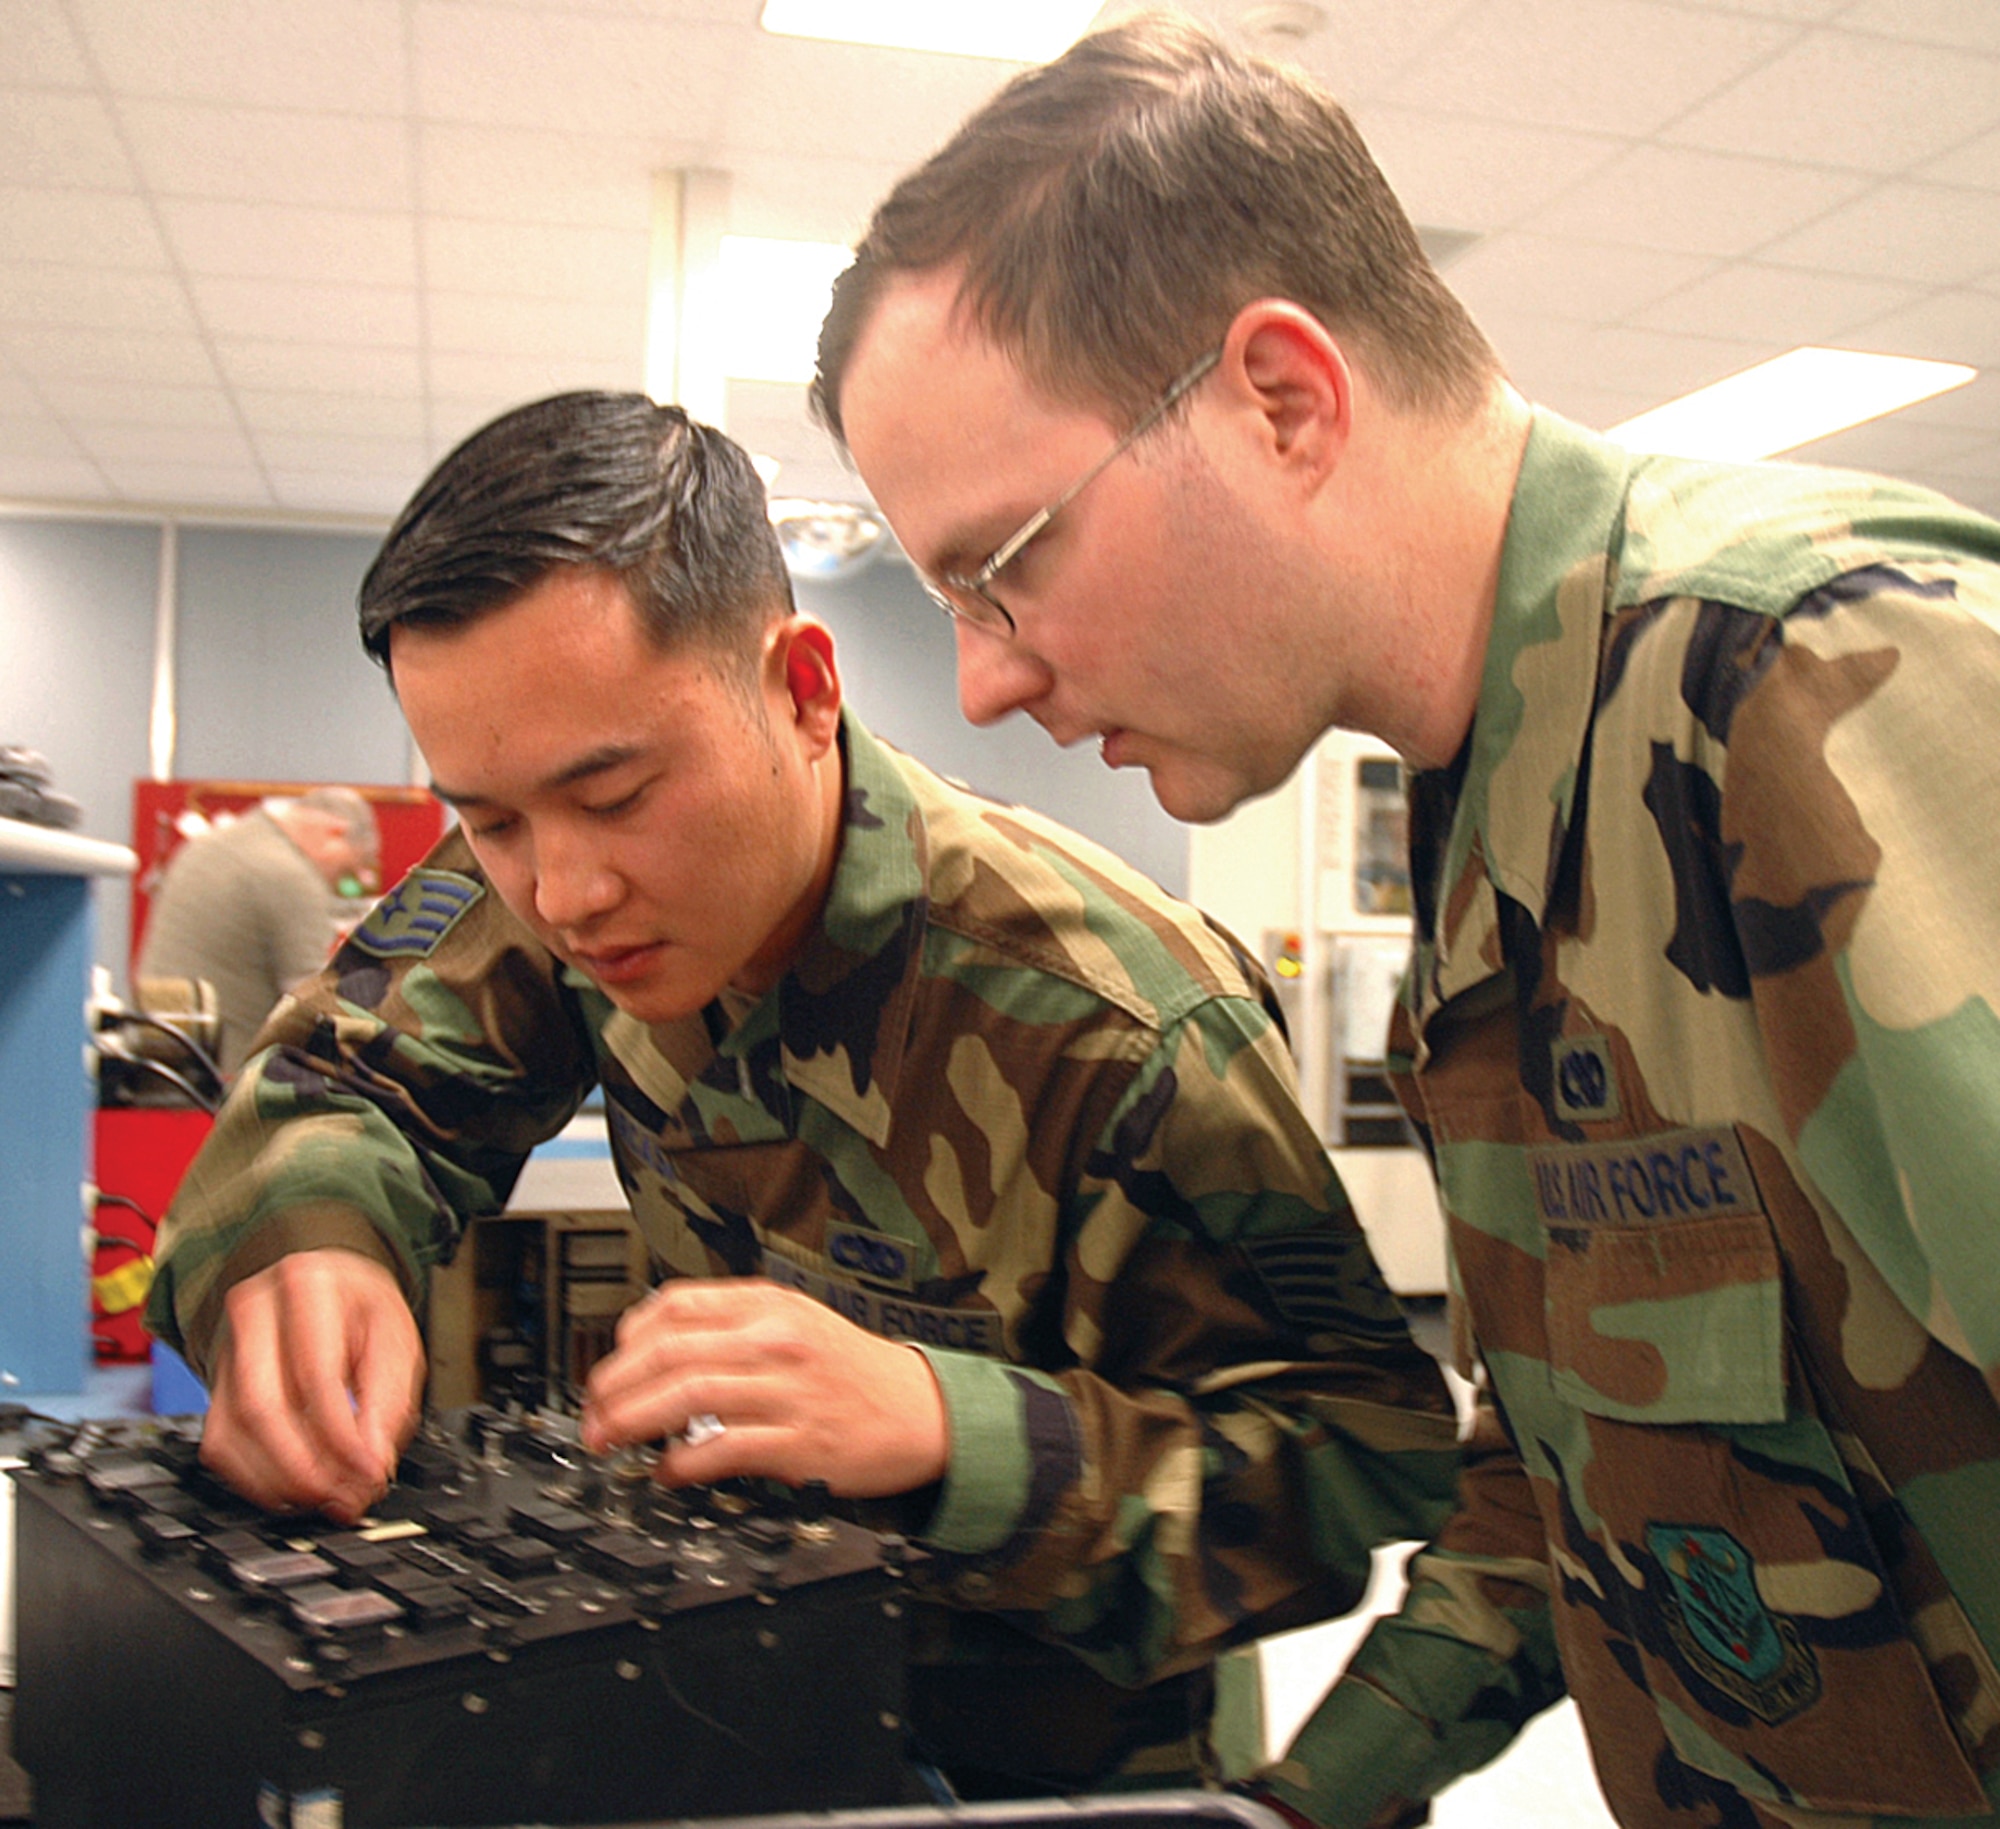 Staff Sgt. Christopher Parcasio, left, demonstrates how to repair a Fuel System Engine Start control panel to his troop, Senior Airman Buell Richardson, an avionics technician with the 446th Maintenance Squadron, McChord Air Force Base, Wash. (U.S. Air Force photo/Tech. Sgt. Jake Chappelle)